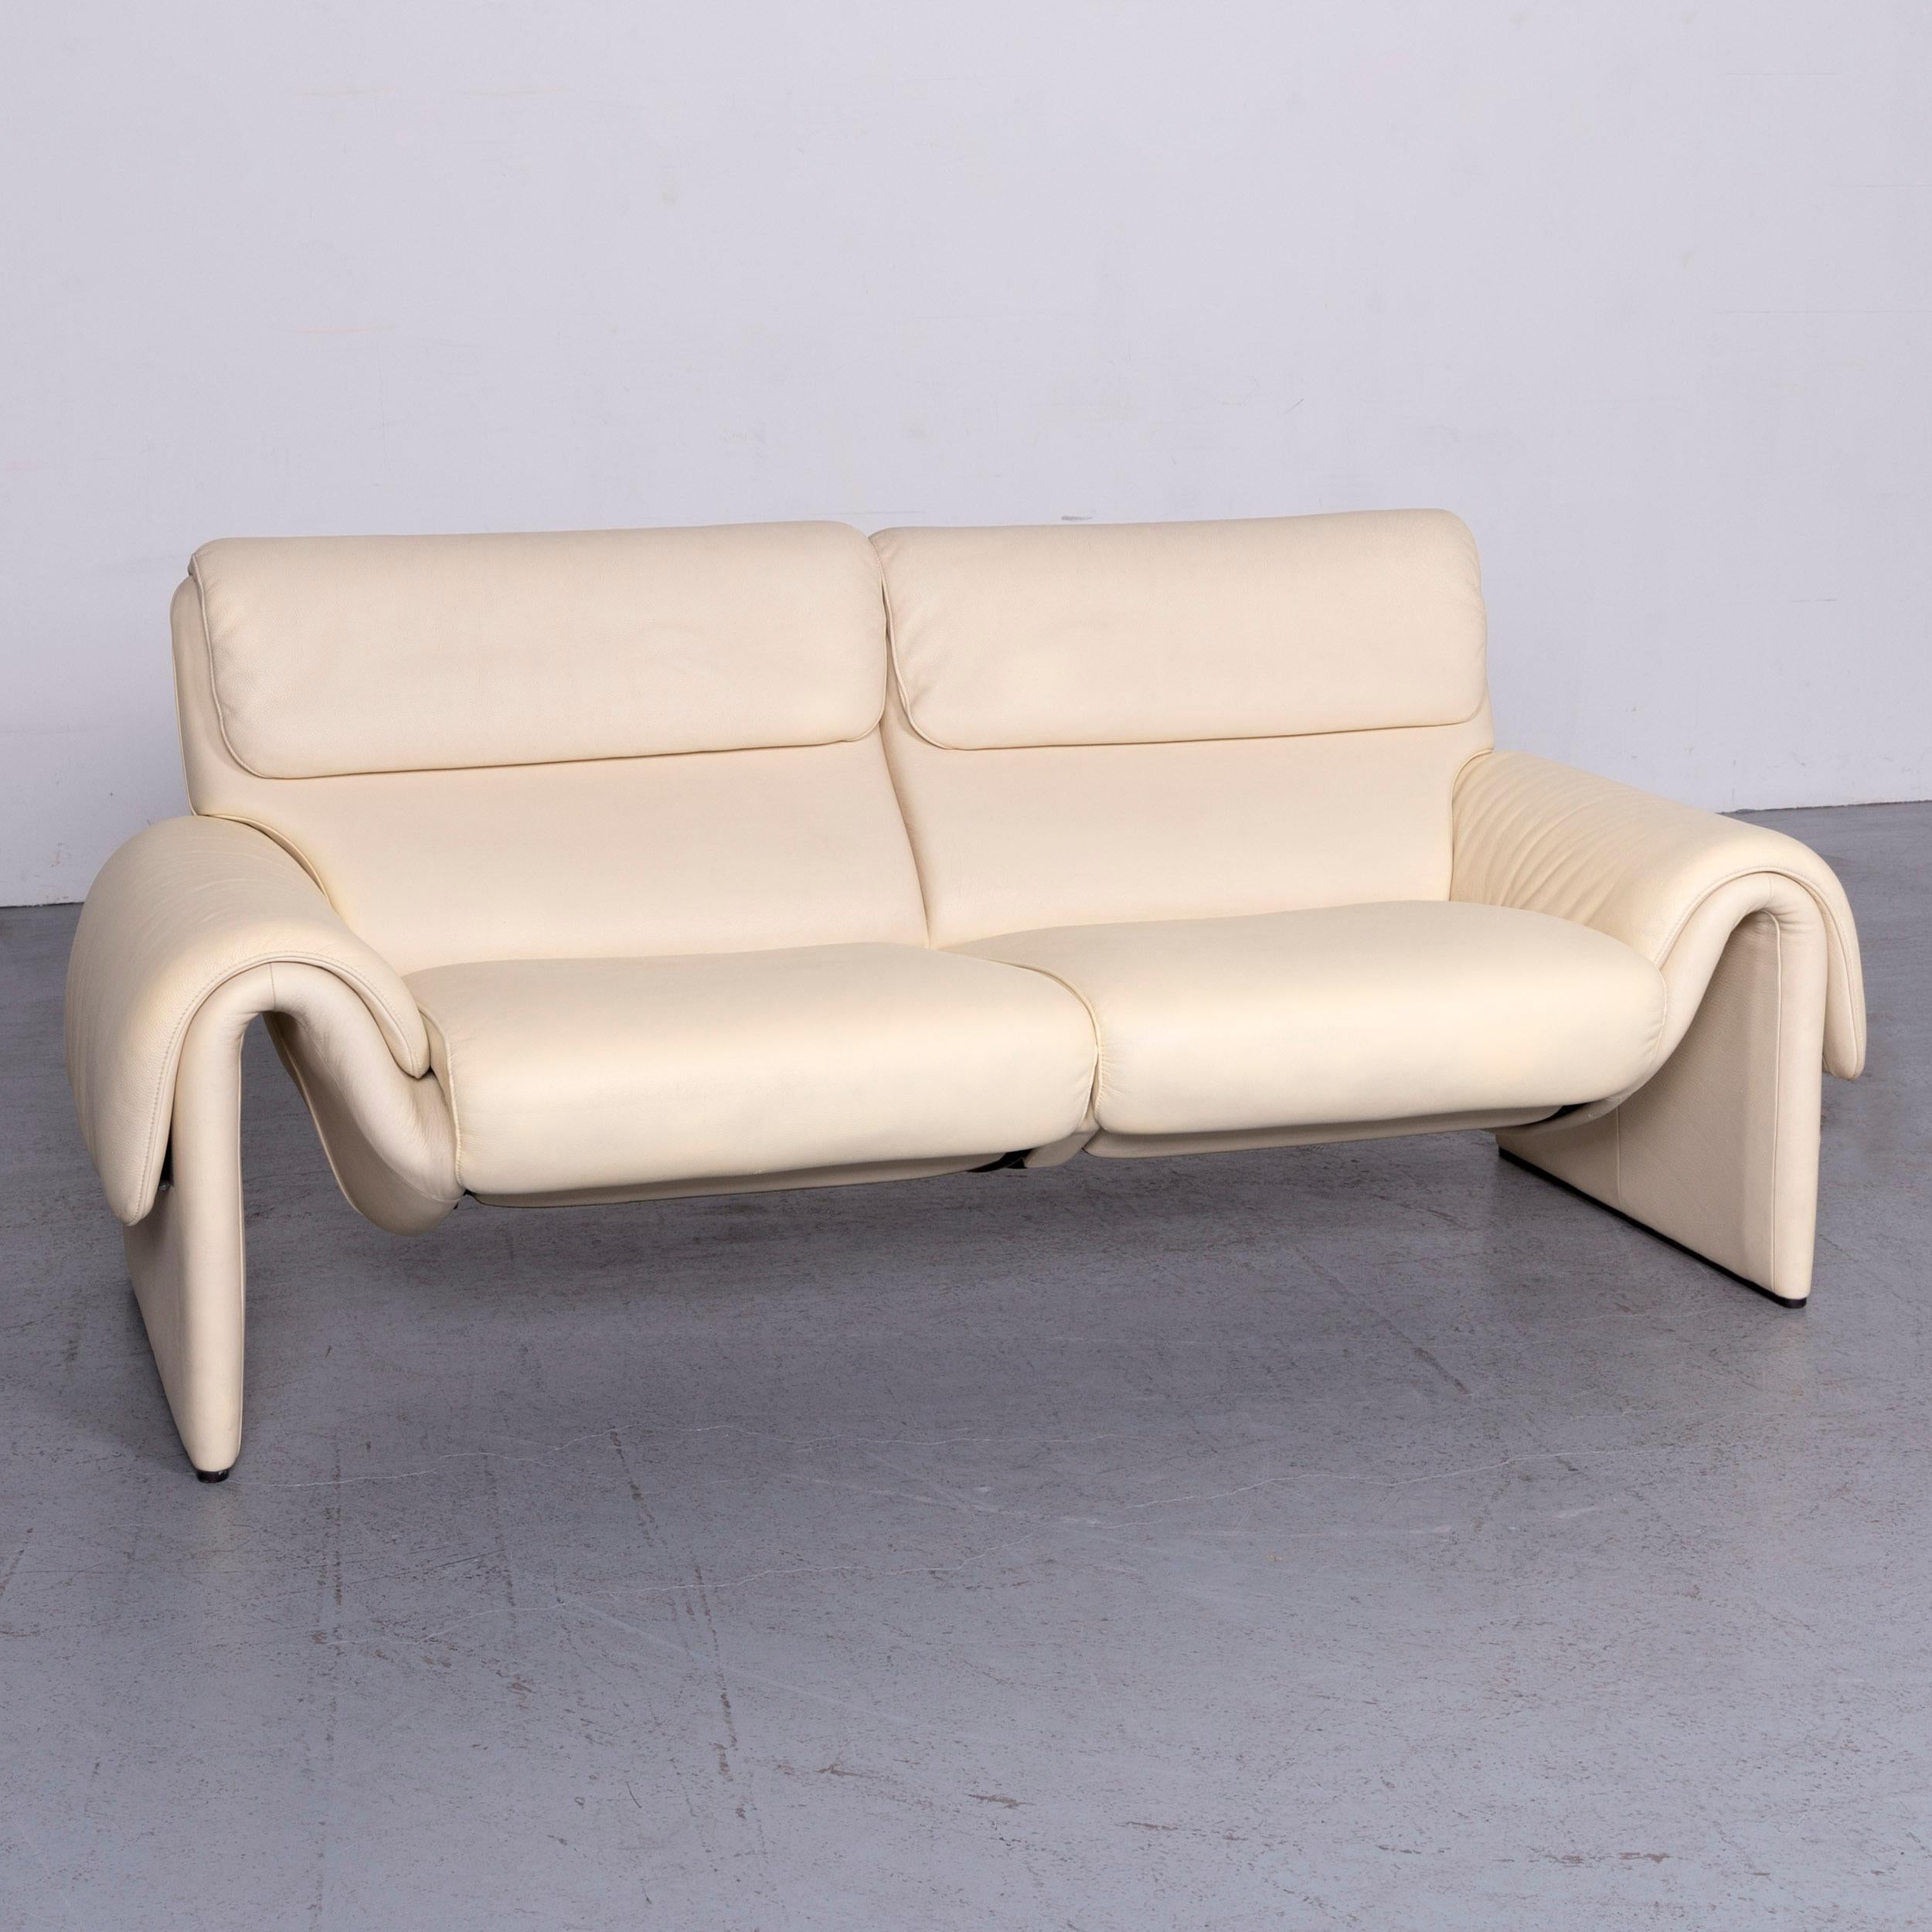 We bring to you a De Sede DS 2000 designer sofa crème leather relax function couch.